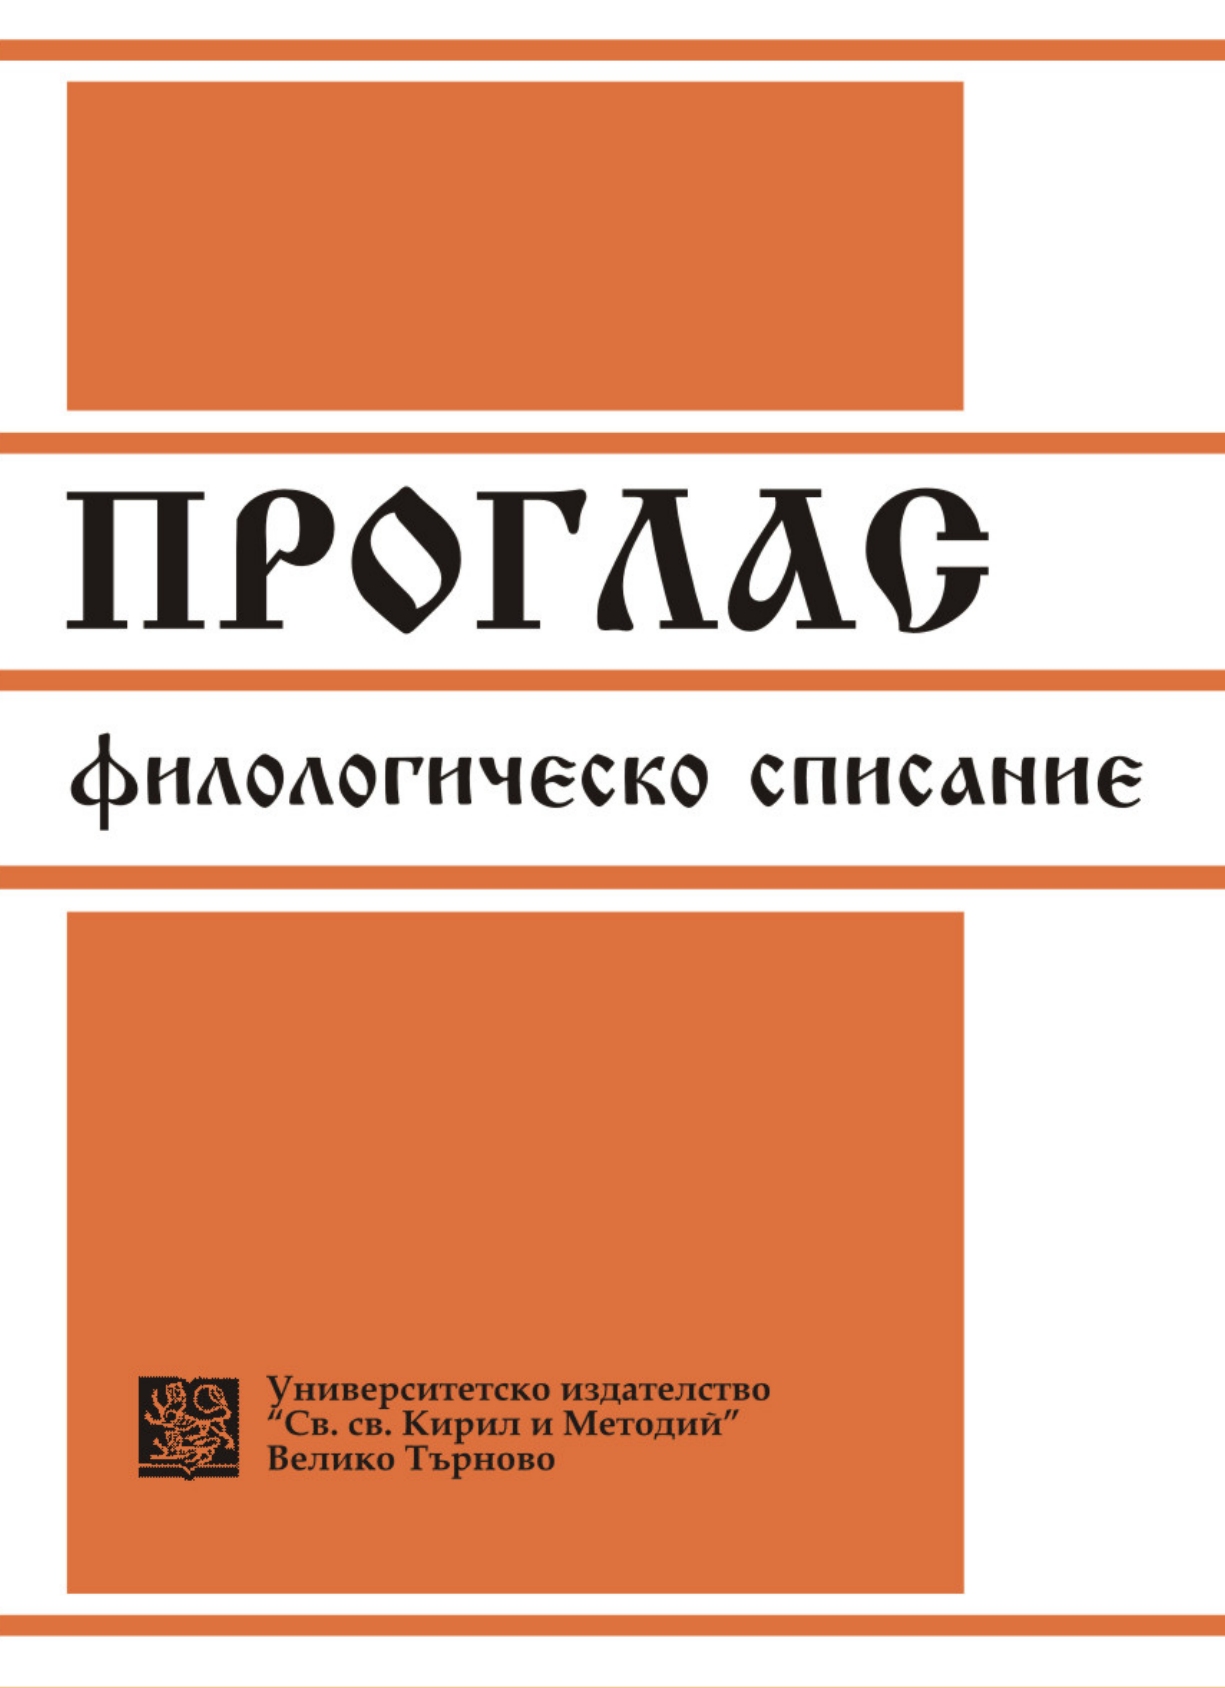 The Metaphor of “Turkish Yoke” – a Concept of Bulgarian National Culture Cover Image